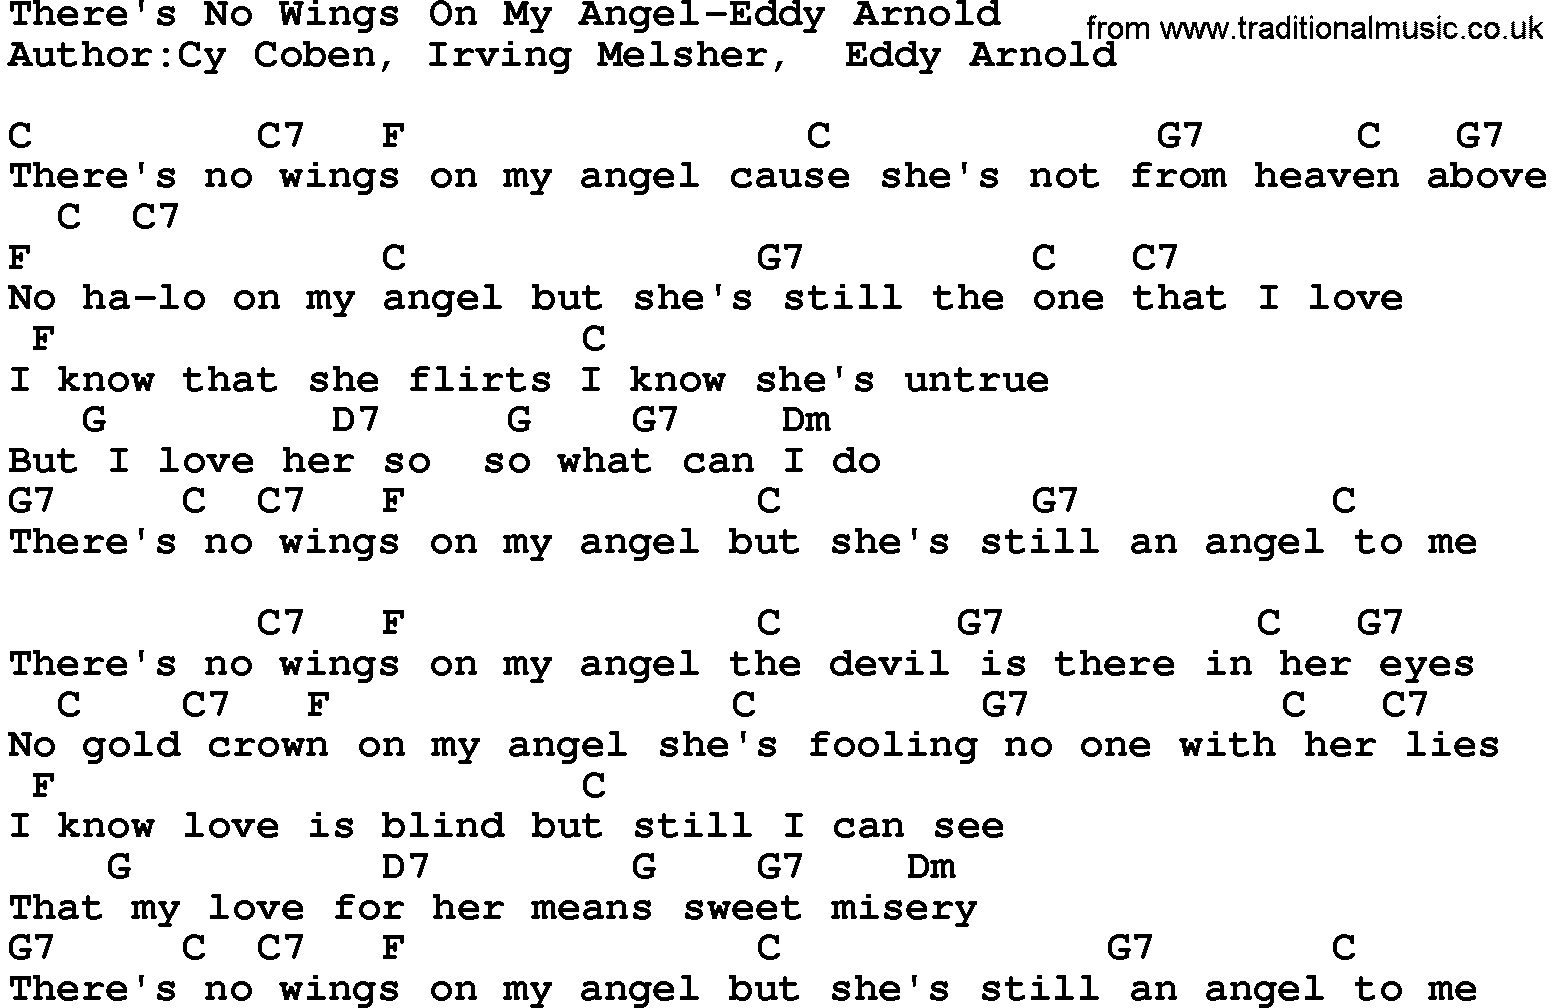 Country music song: There's No Wings On My Angel-Eddy Arnold lyrics and chords